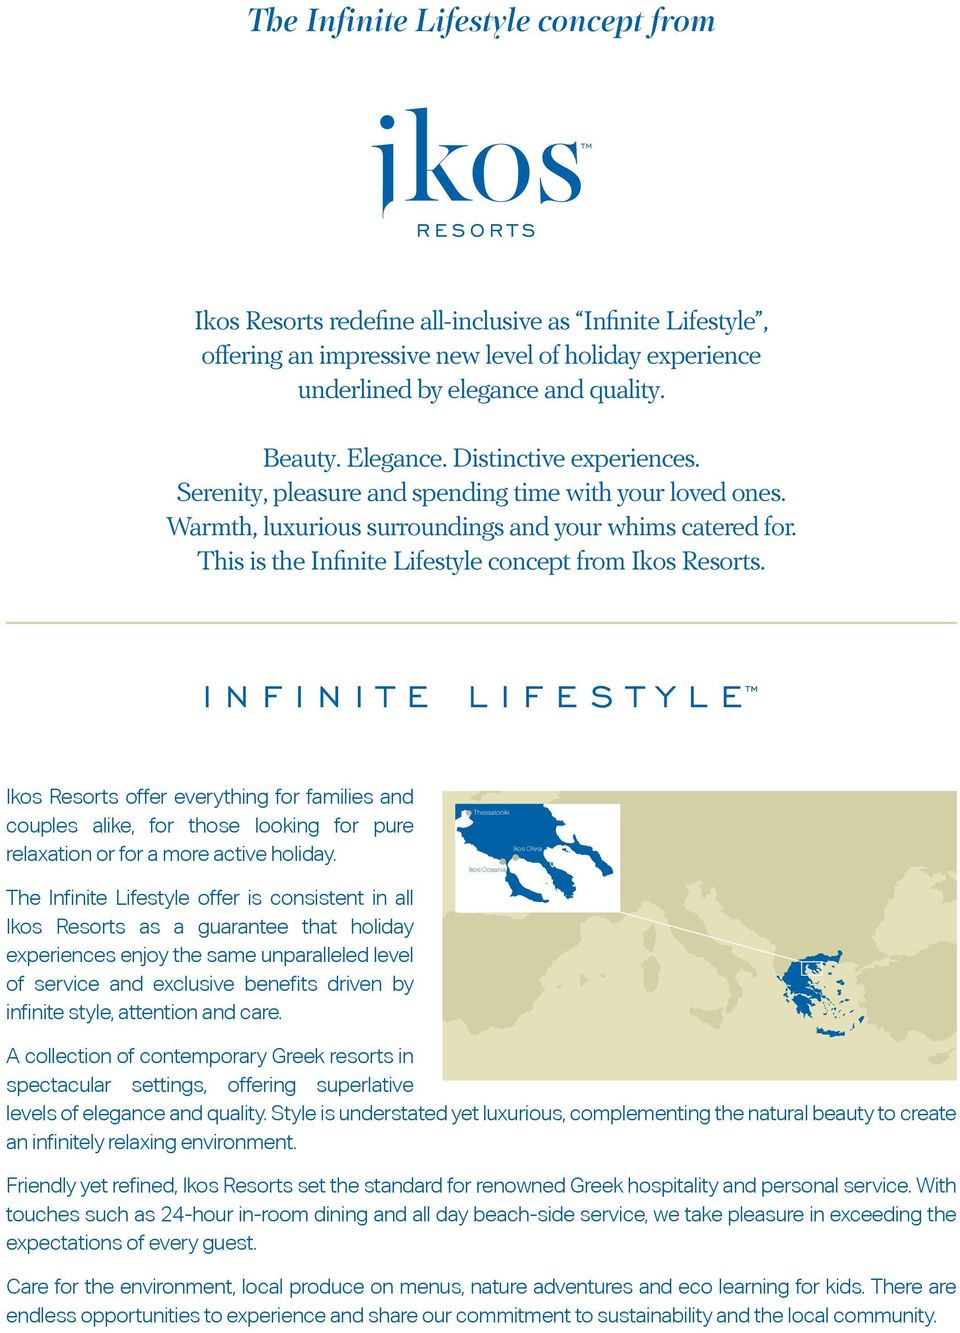 This is the Infinite Lifestyle concept from Ikos Resorts. Ikos Resorts offer everything for families and couples alike, for those looking for pure relaxation or for a more active holiday.